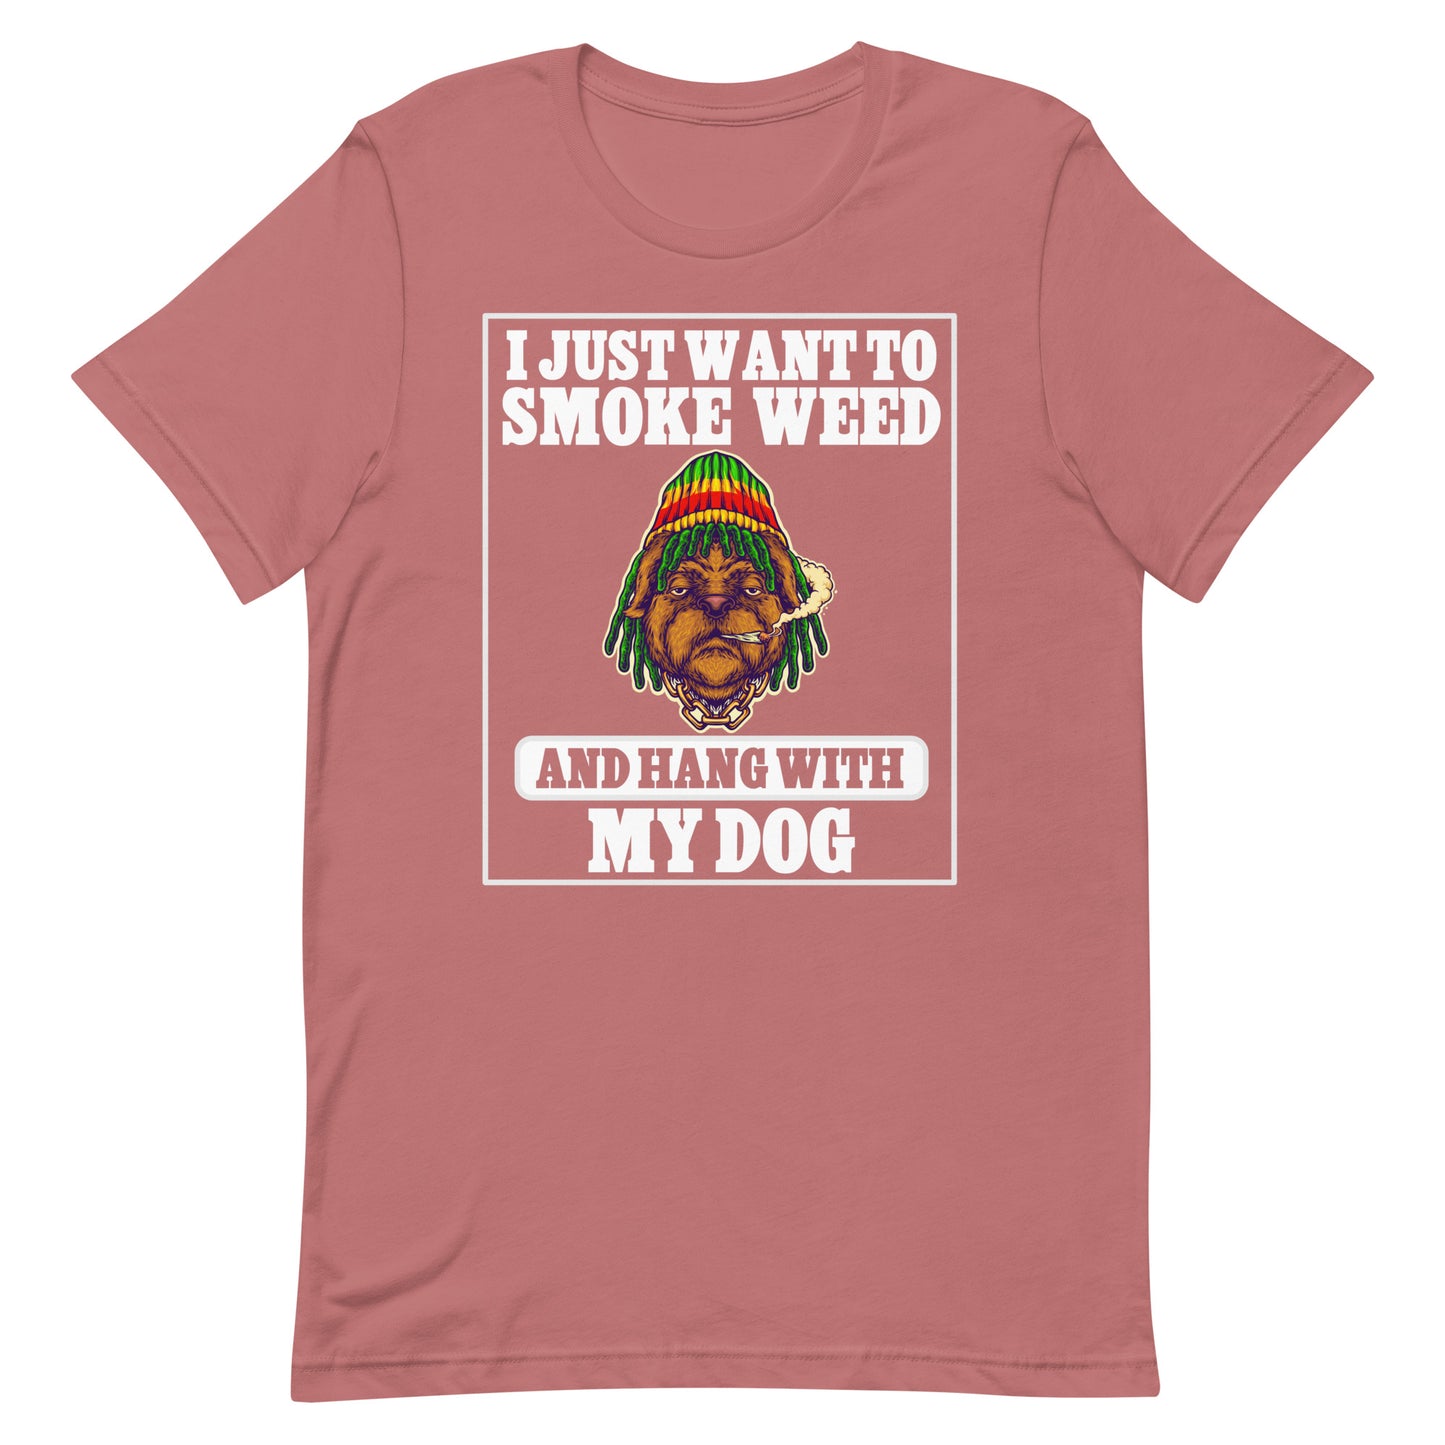 I Just Want Smoke and Hang With My Dog T-Shirt